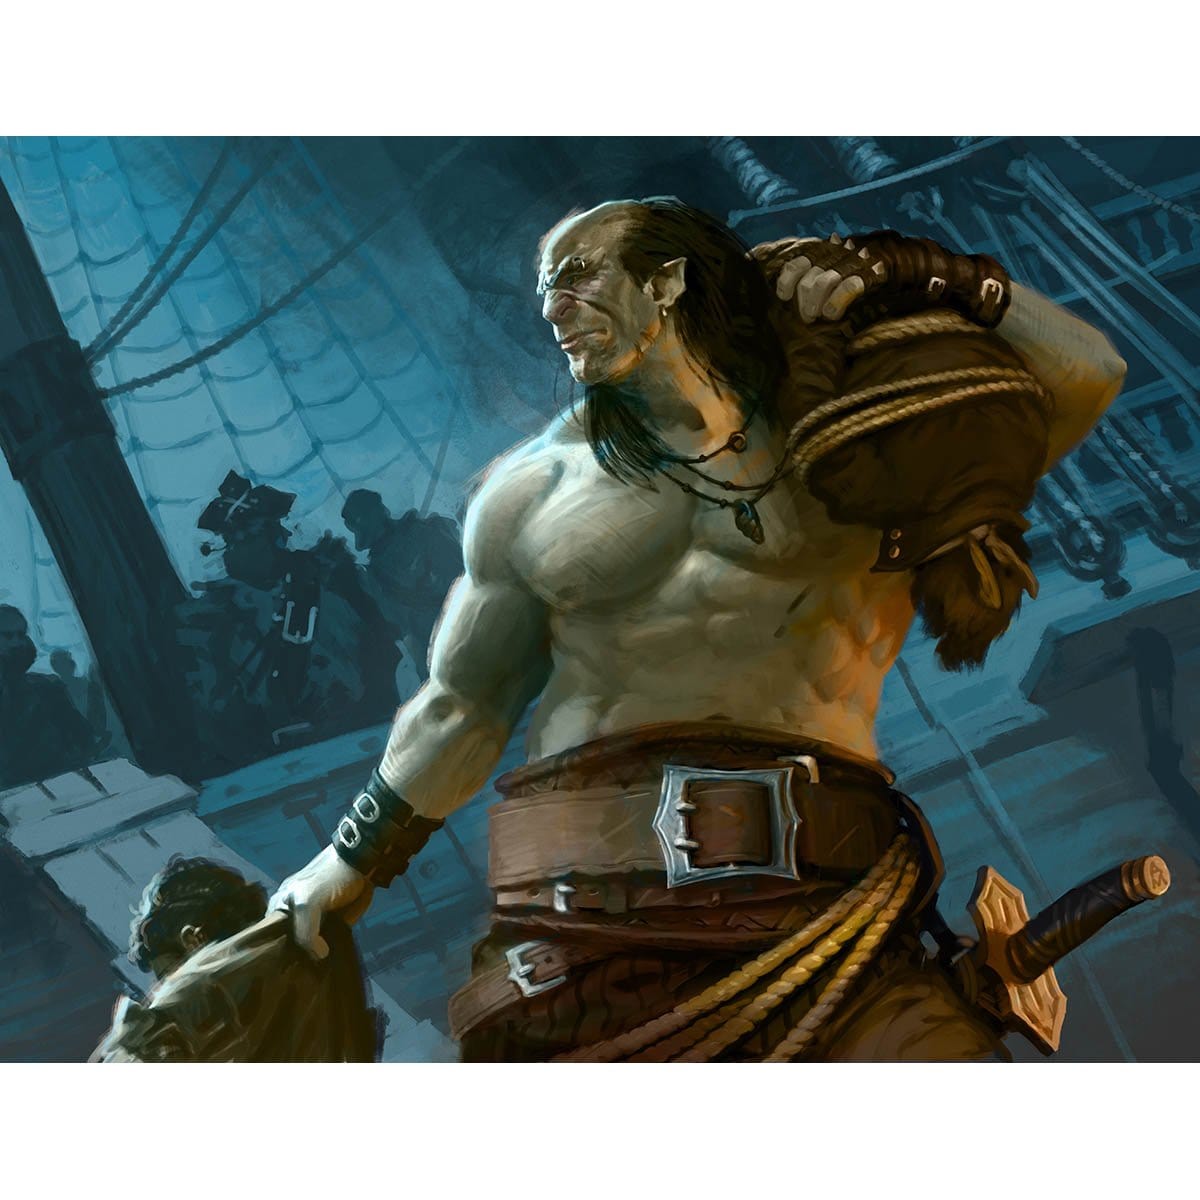 Ruthless Knave Print - Print - Original Magic Art - Accessories for Magic the Gathering and other card games